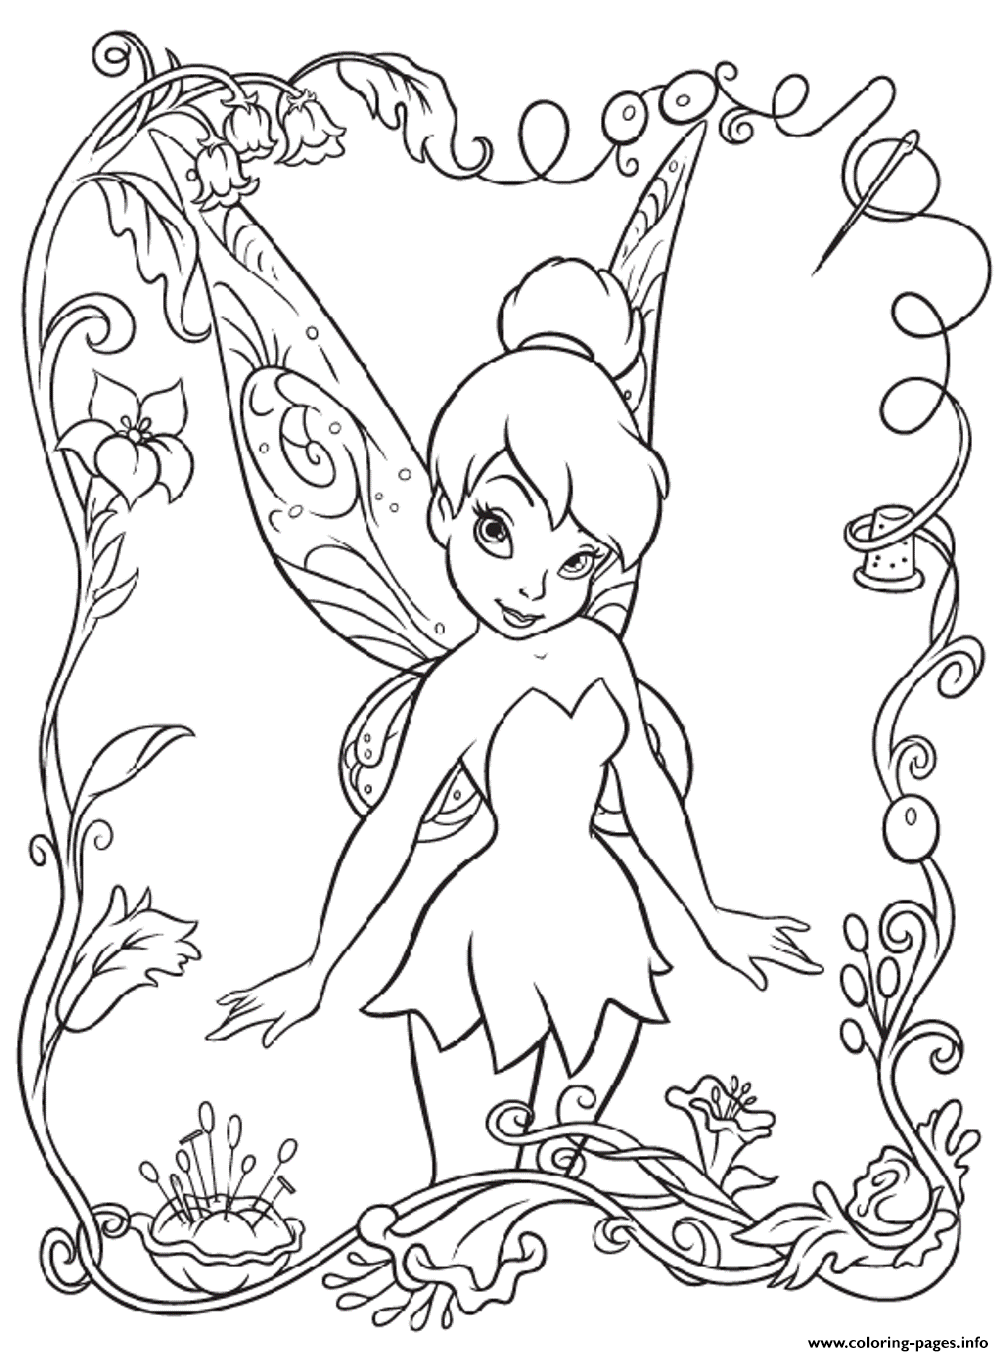 Cute Tinkerbell S1bb7 coloring